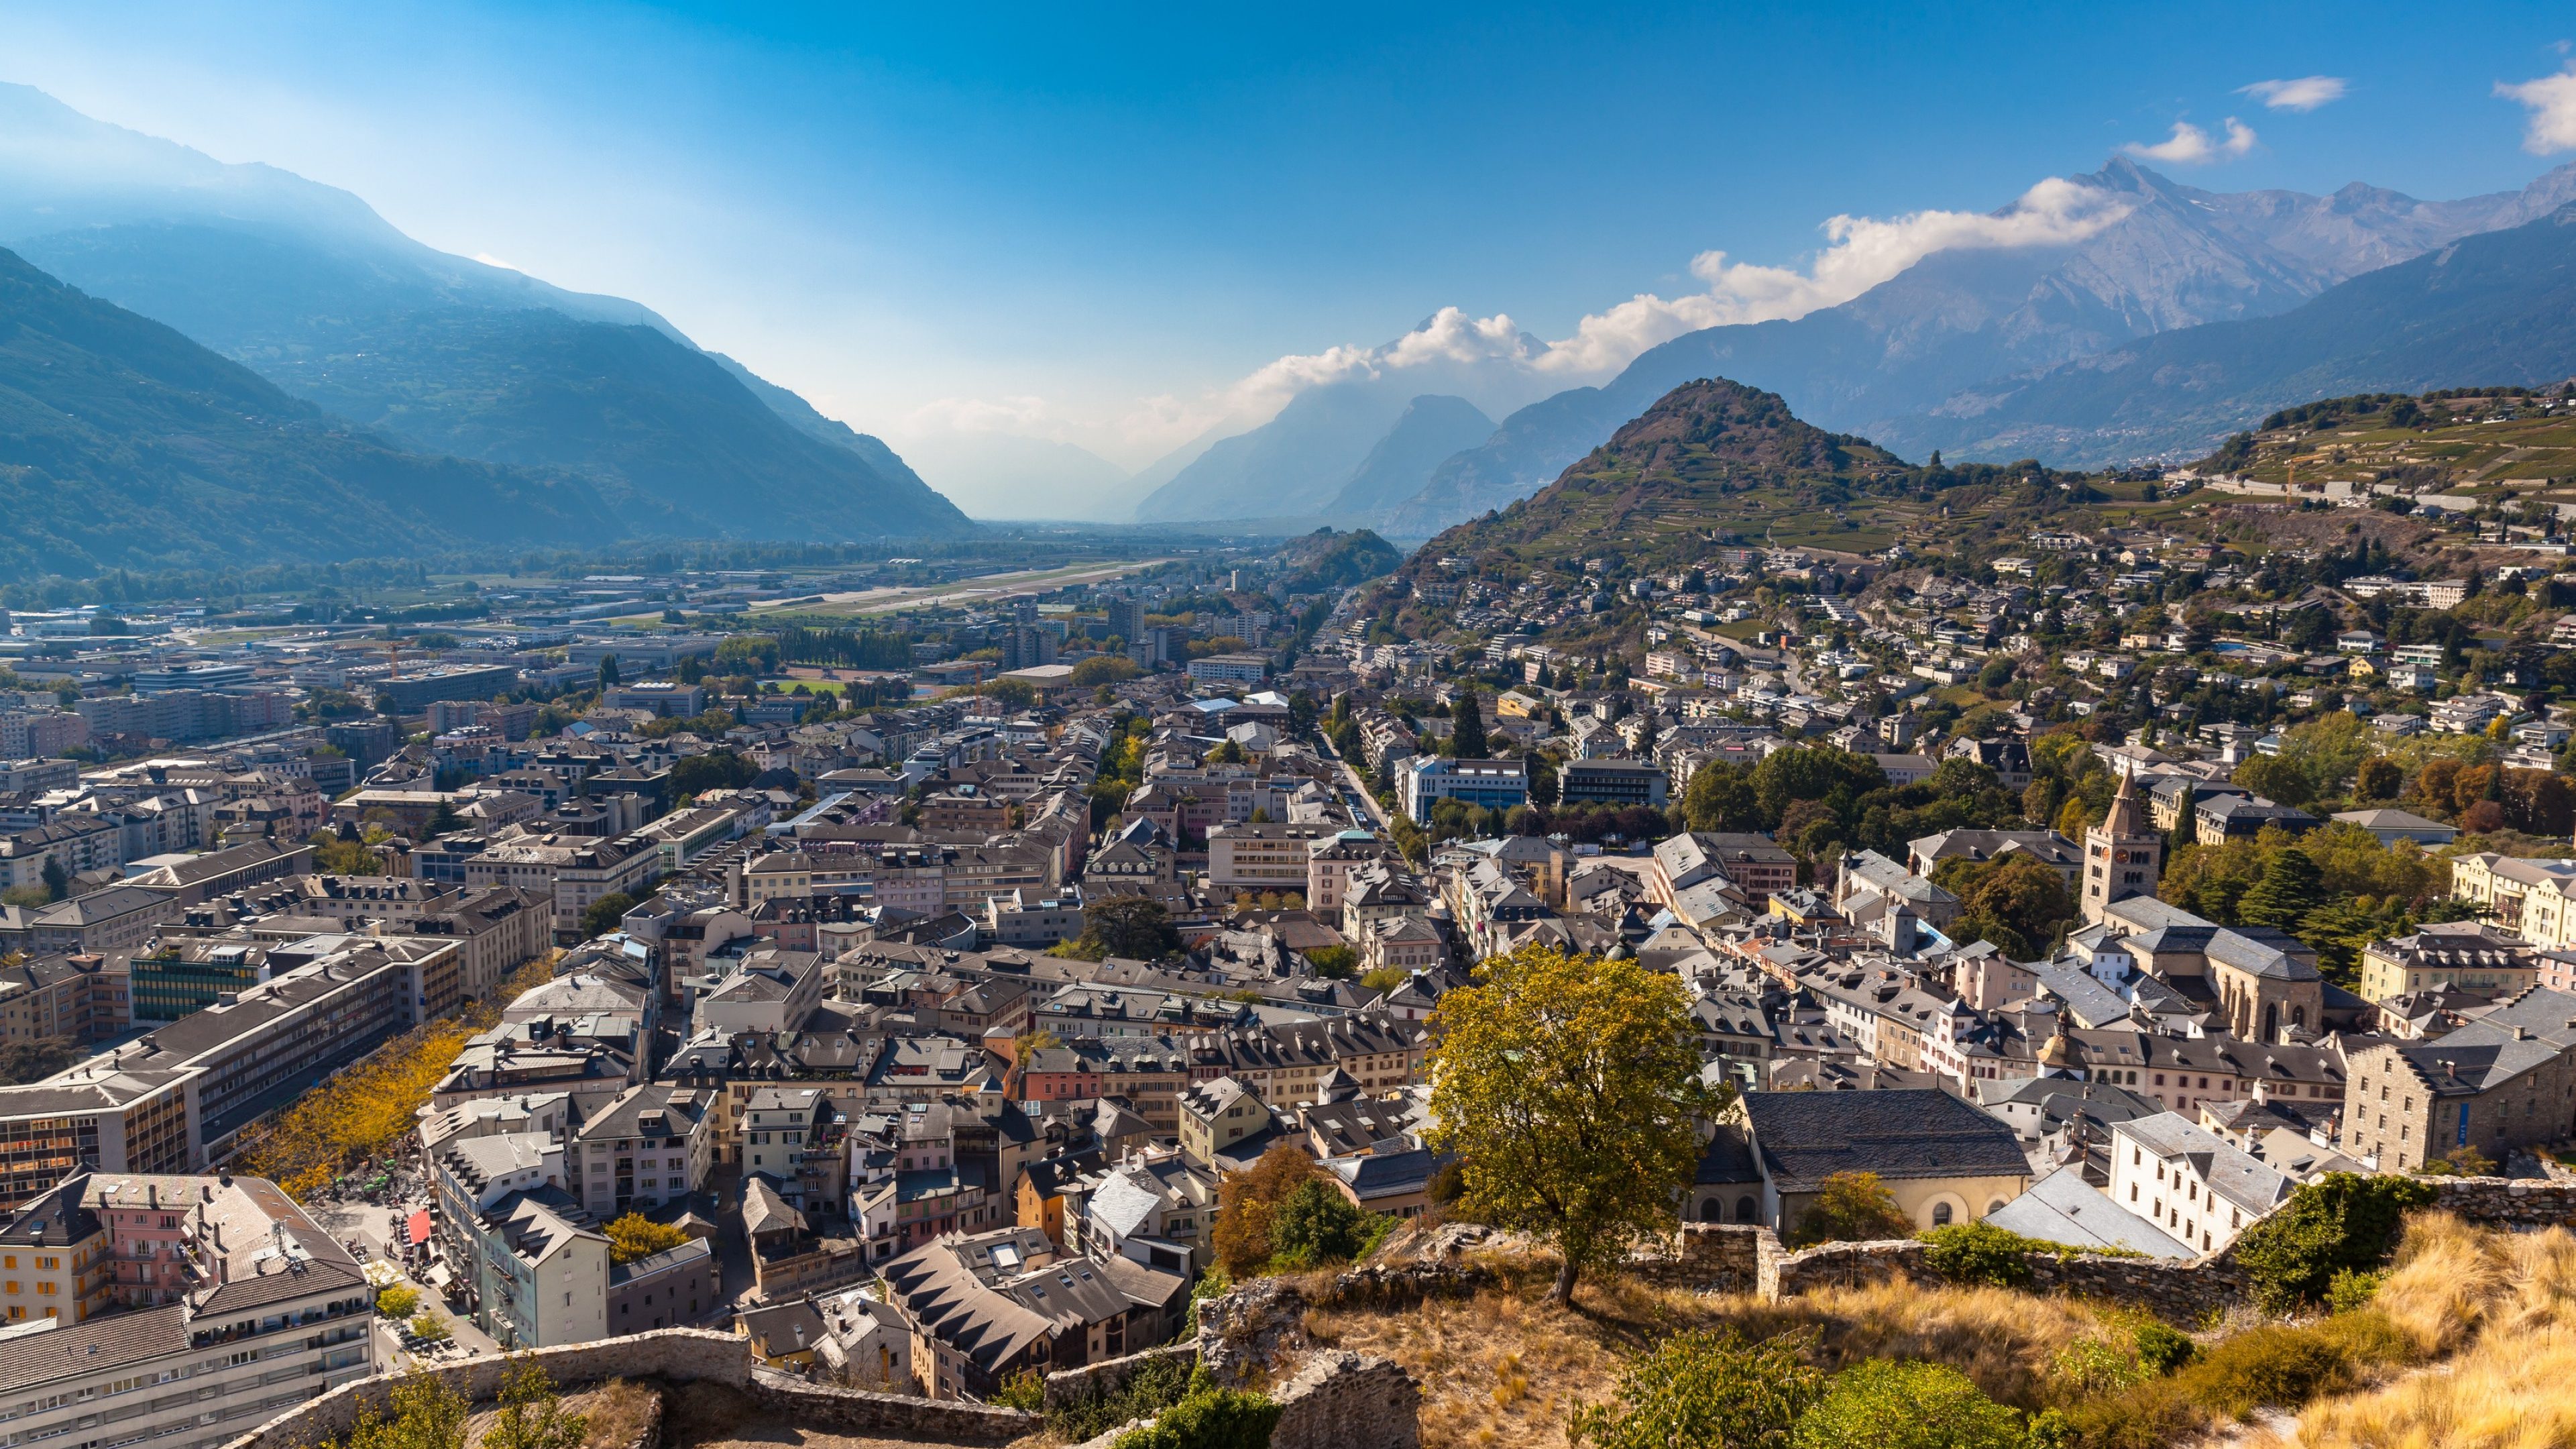 Aerial view of the old town of Sion city from the Tourbillon castle on a sunny day, canton of Valais, Switzerland